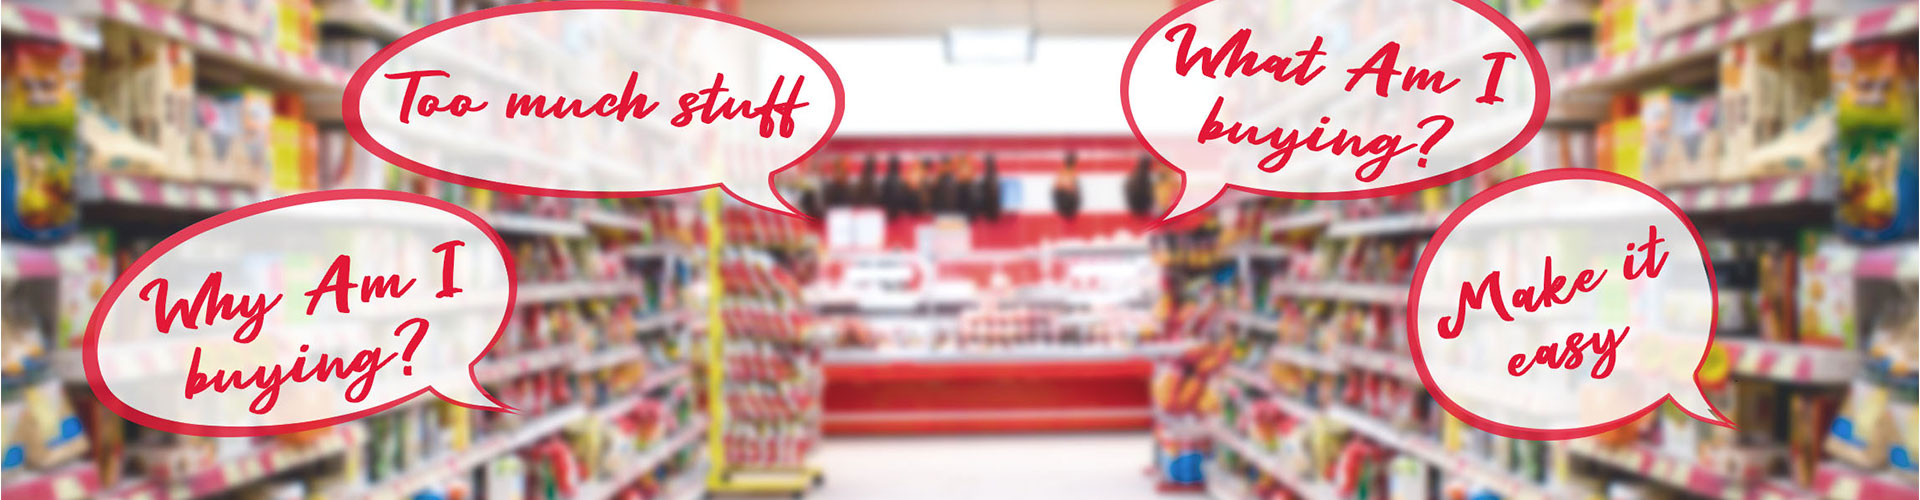 Blog banner featuring blurred store aisle with speech bubbles overlaid on top asking shopper questions